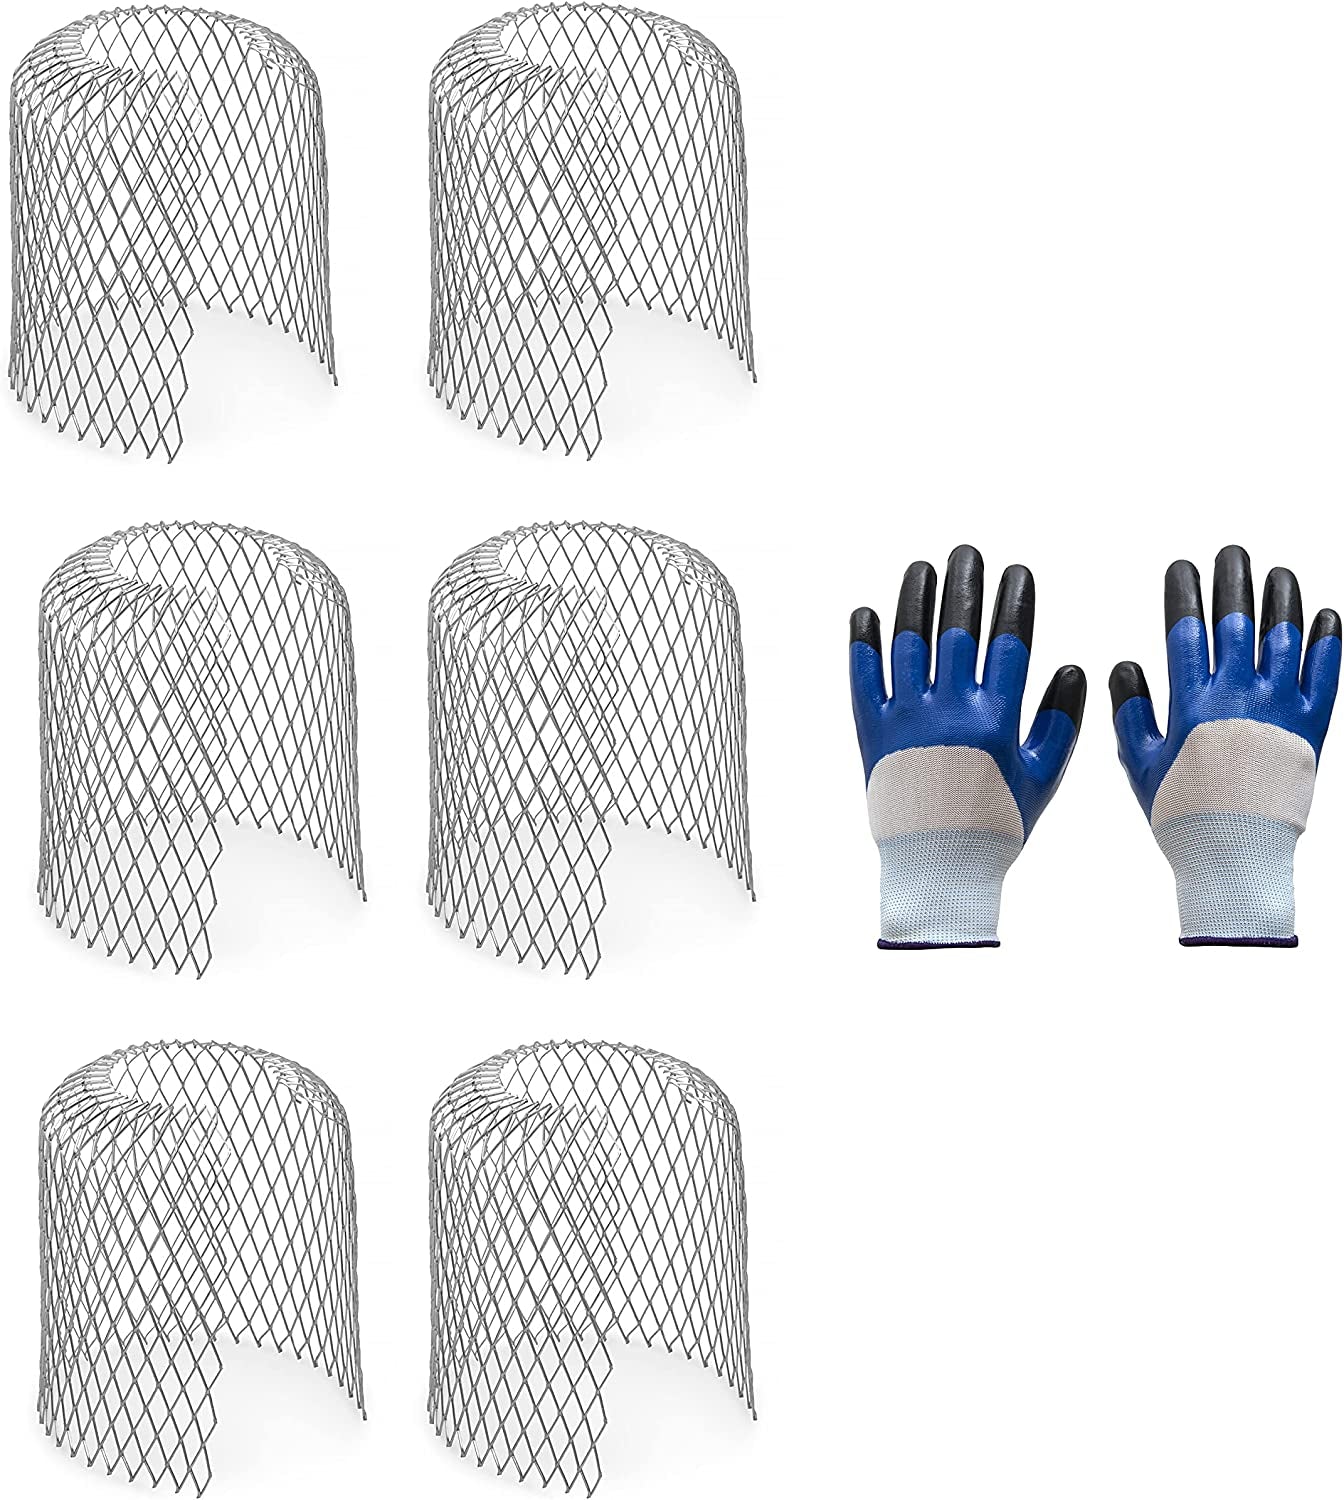  6 Pack Gutter Guards Downspout - Expandable Stainless Steel Mesh Strainer - Stop Leaf and Debris Blockage - Gutter Spout Protection - Complete with a Pair of Working Gloves